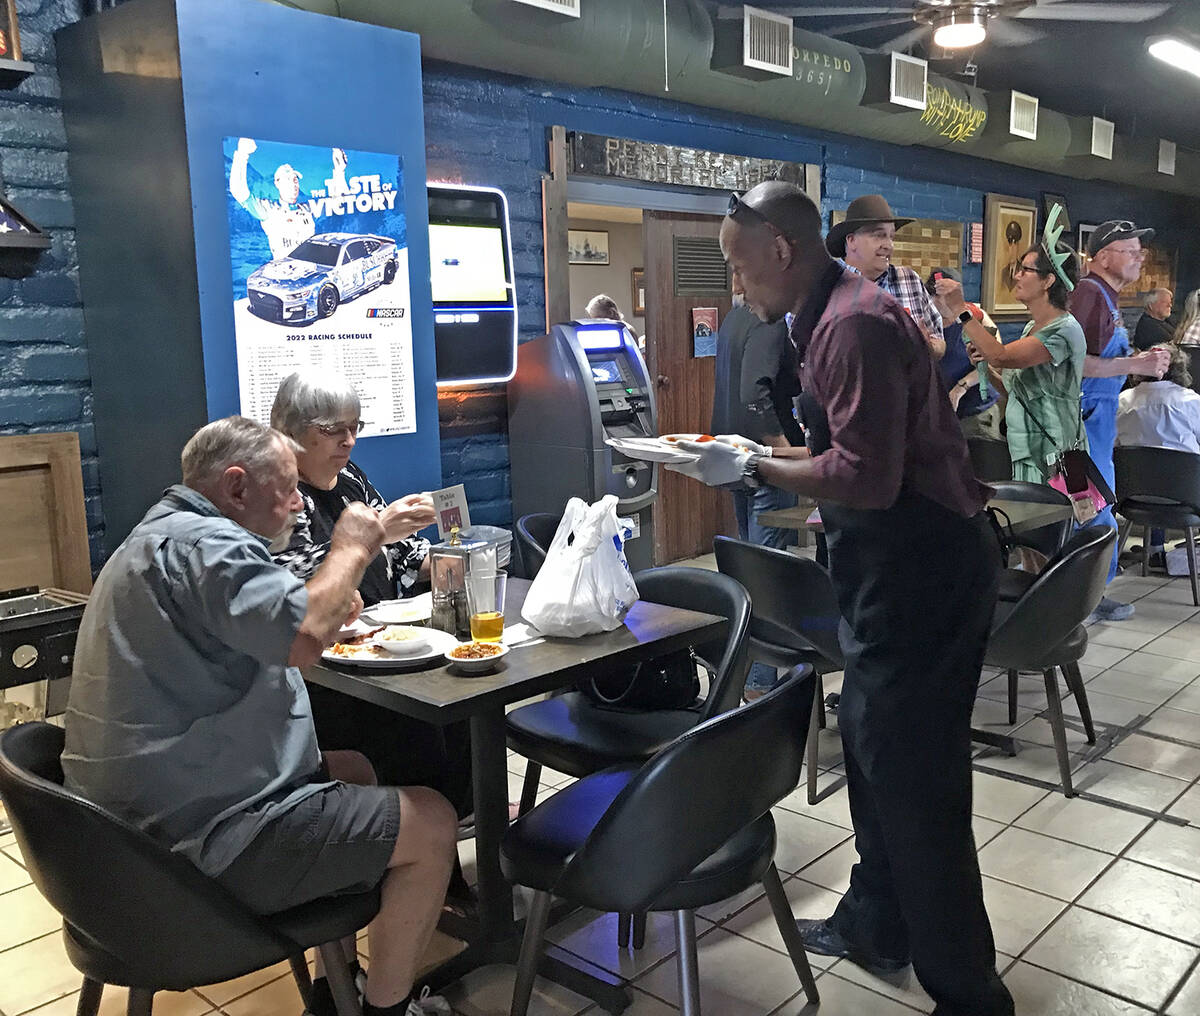 Robin Hebrock/Pahrump Valley Times A volunteers is pictured serving a plate to patrons at the " ...